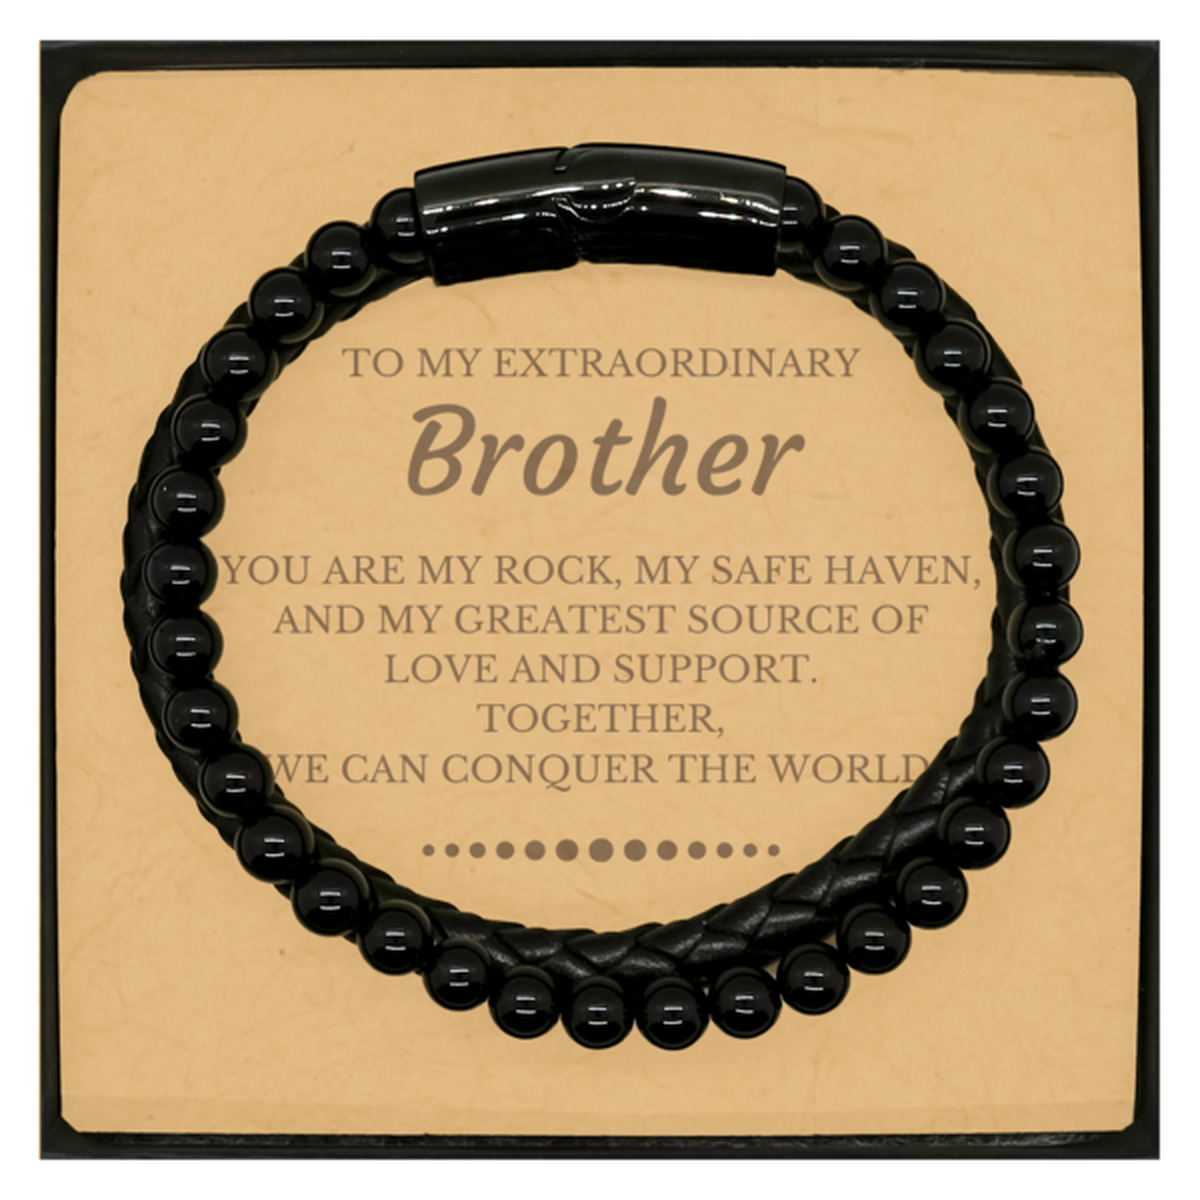 To My Extraordinary Brother Gifts, Together, we can conquer the world, Birthday Christmas Stone Leather Bracelets For Brother, Christmas Gifts For Brother